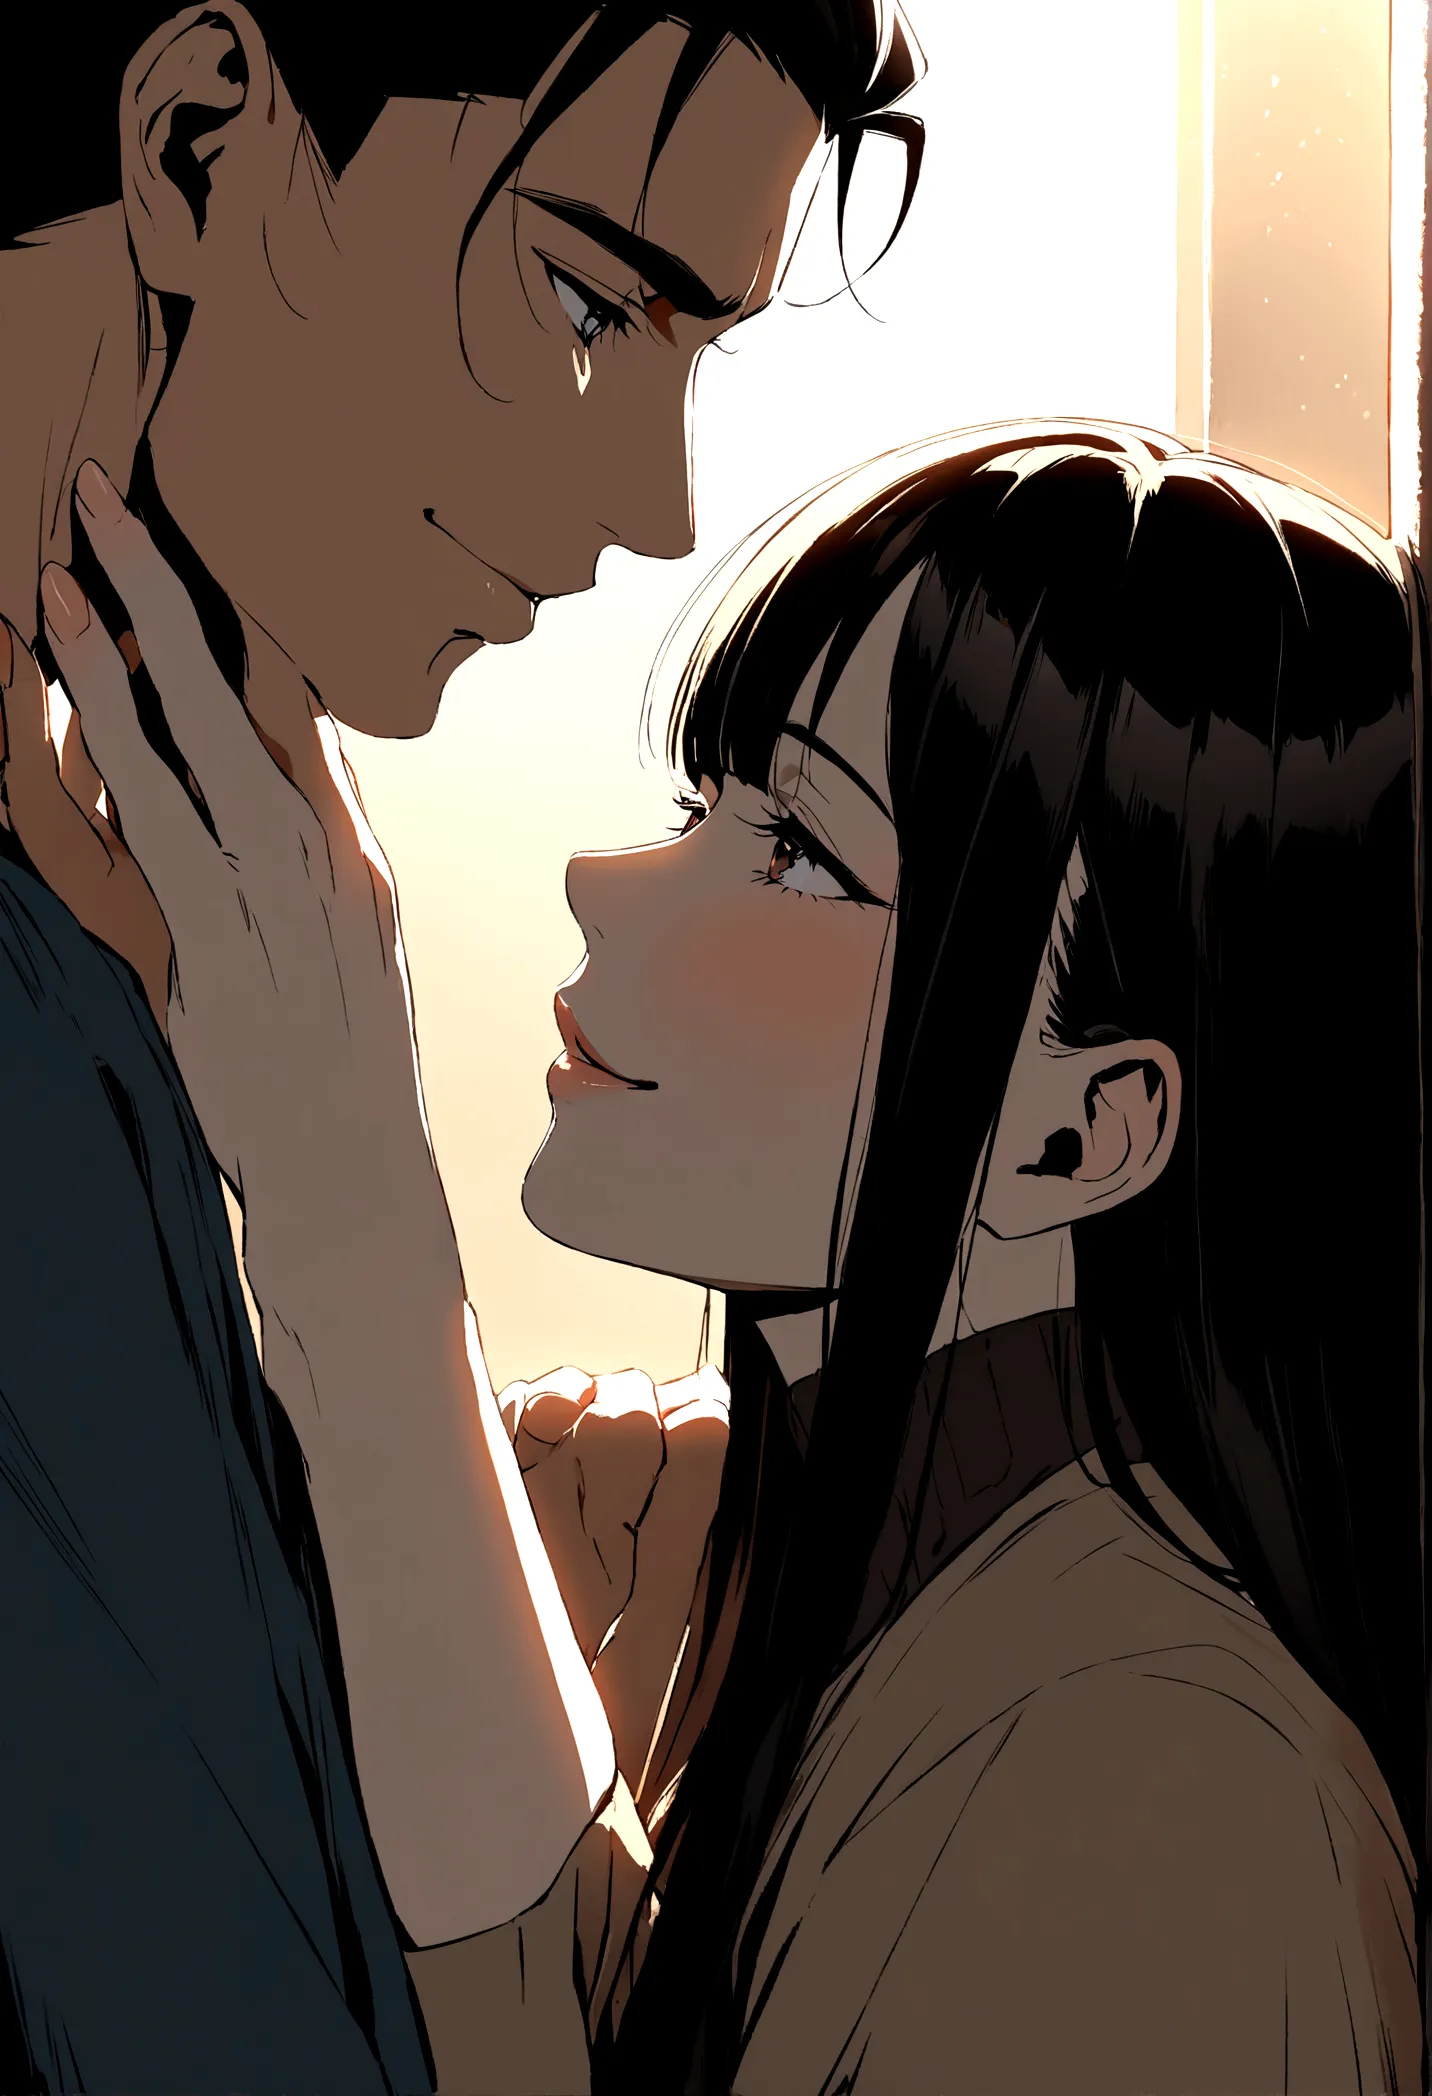 Anime illustration of a man with black hair and a woman with long brown hair looking at each other and smiling playfully. Their ...